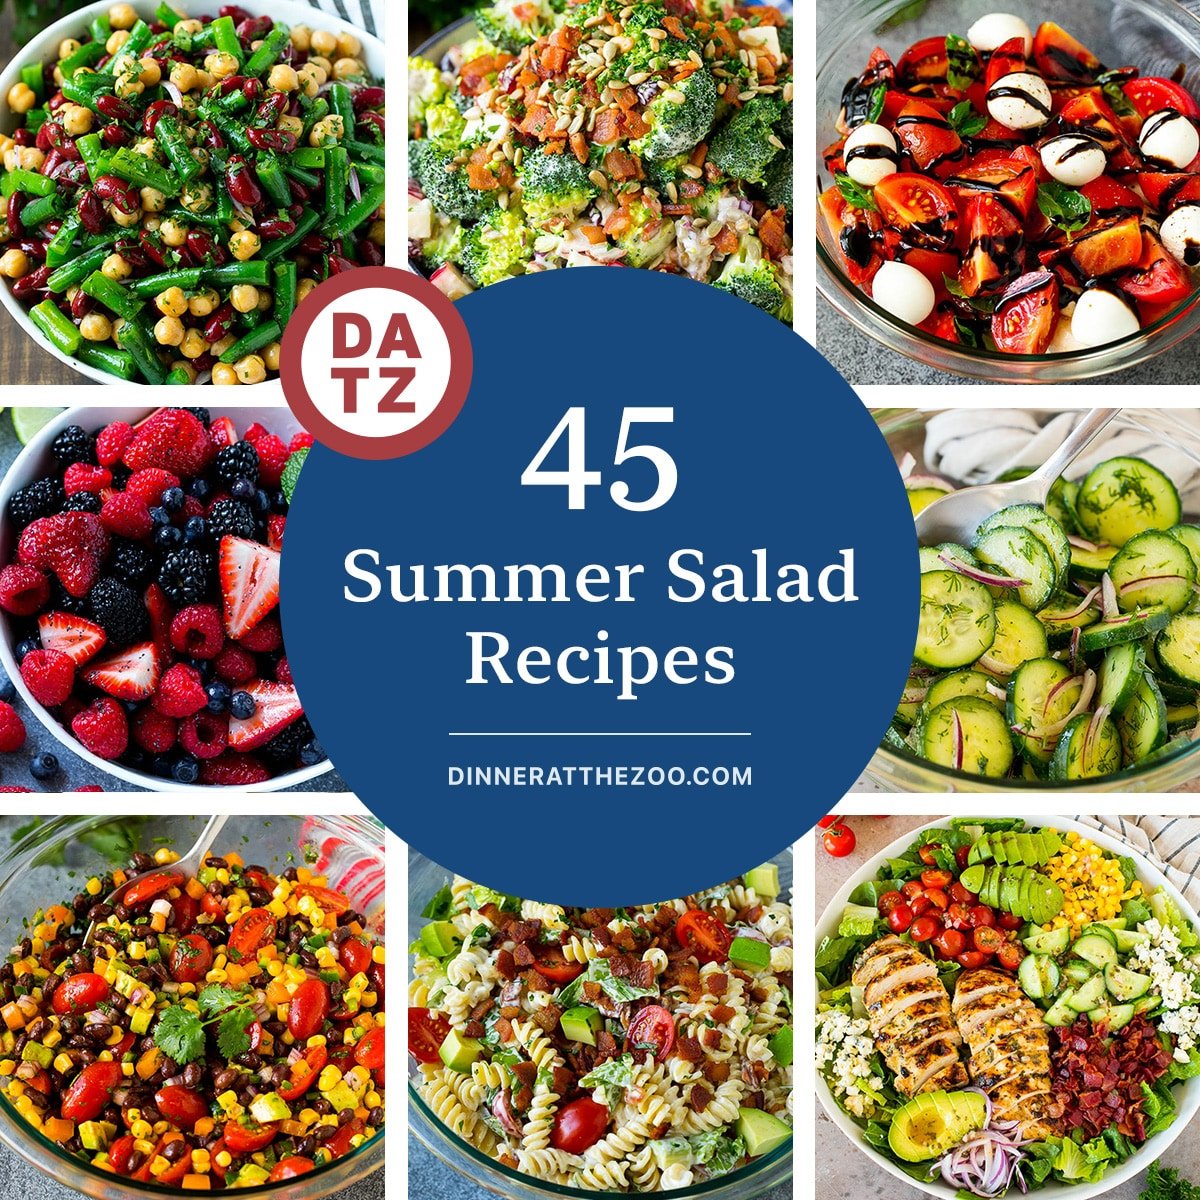 A collection of refreshing summer salad recipes that feature savory meat, fresh veggies, fruit, flavors from around the world and other favorites.